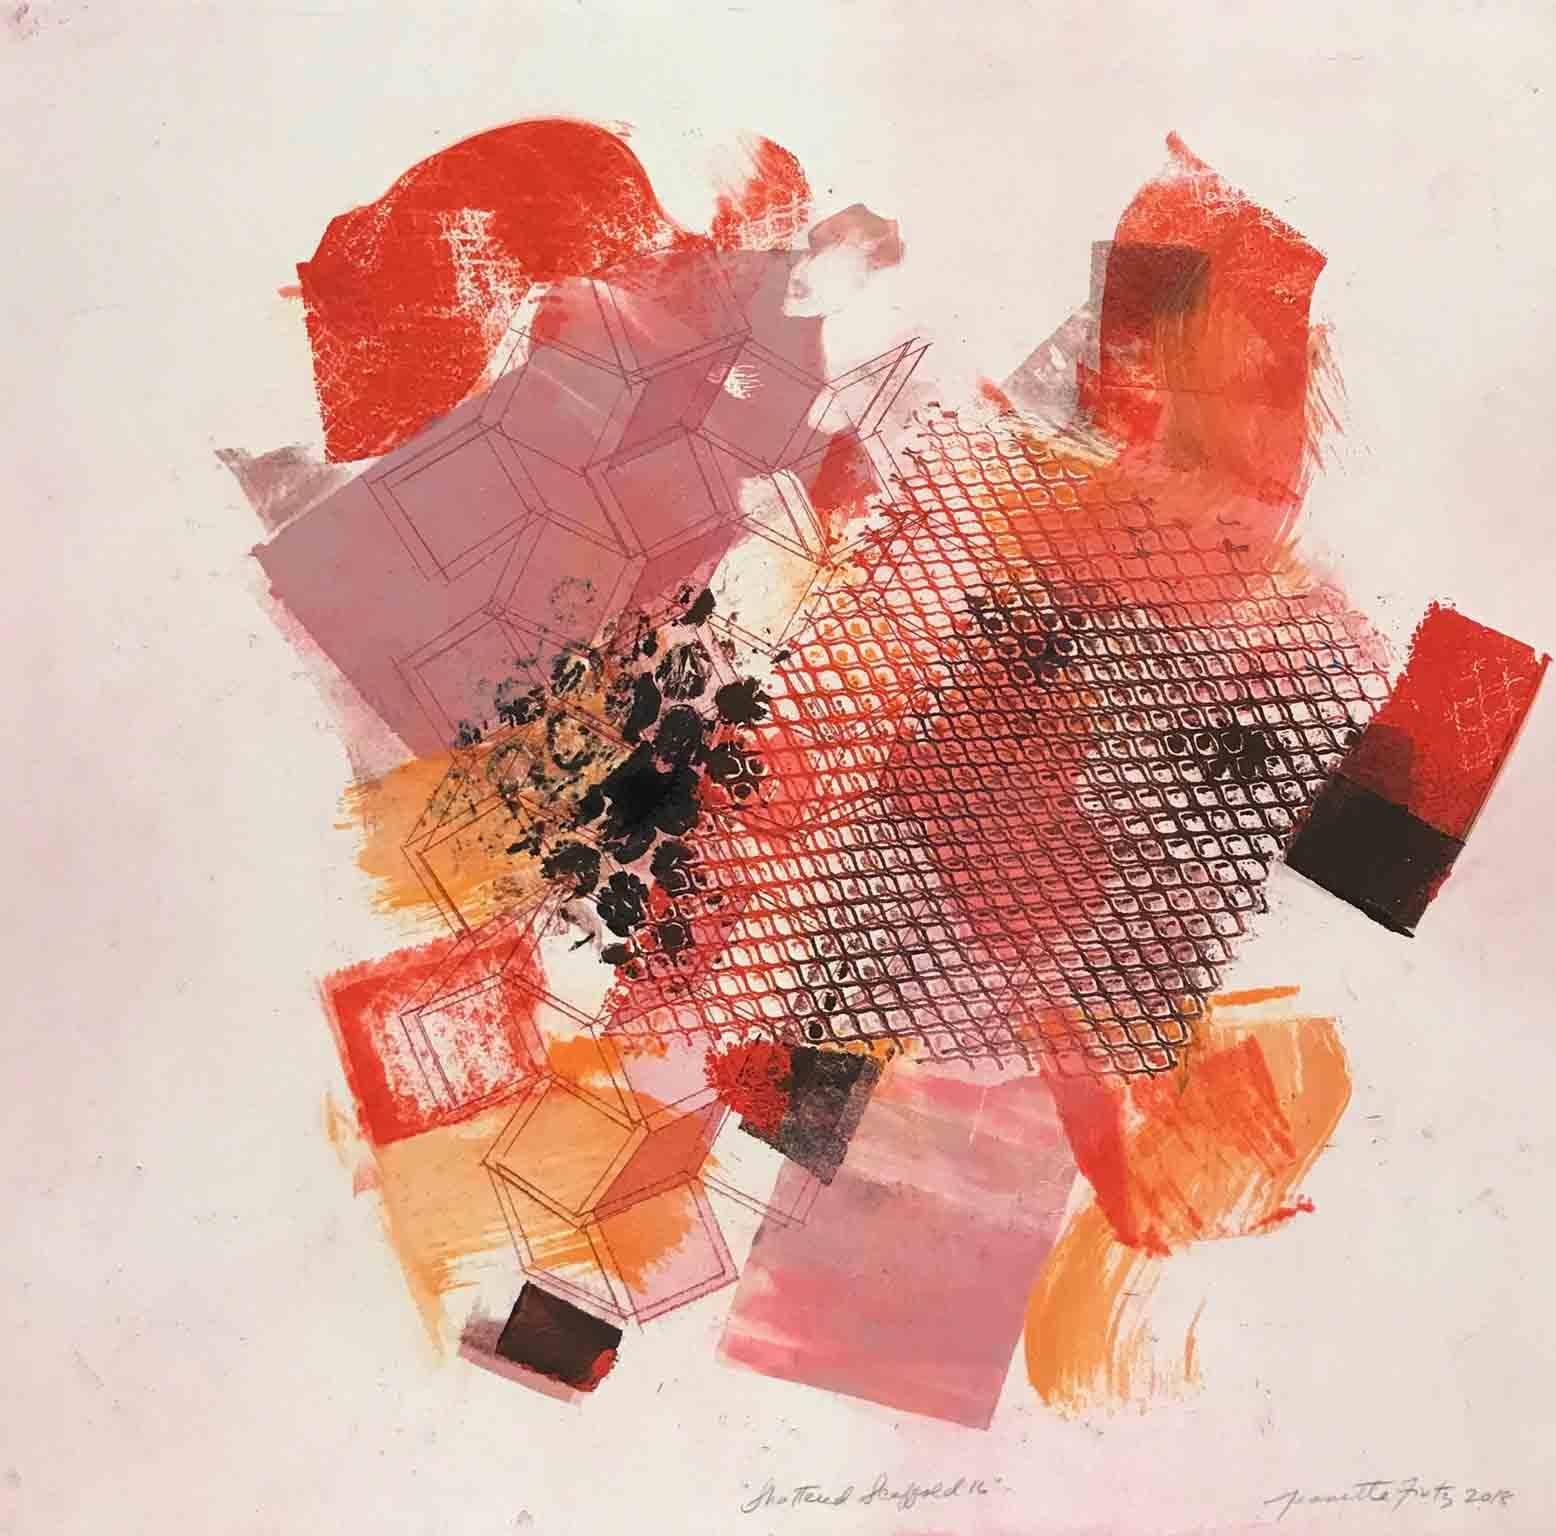 Jeanette Fintz Abstract Print - "Shattered Scaffold 16", gestural abstract monoprint, violet, pink, red, orange.